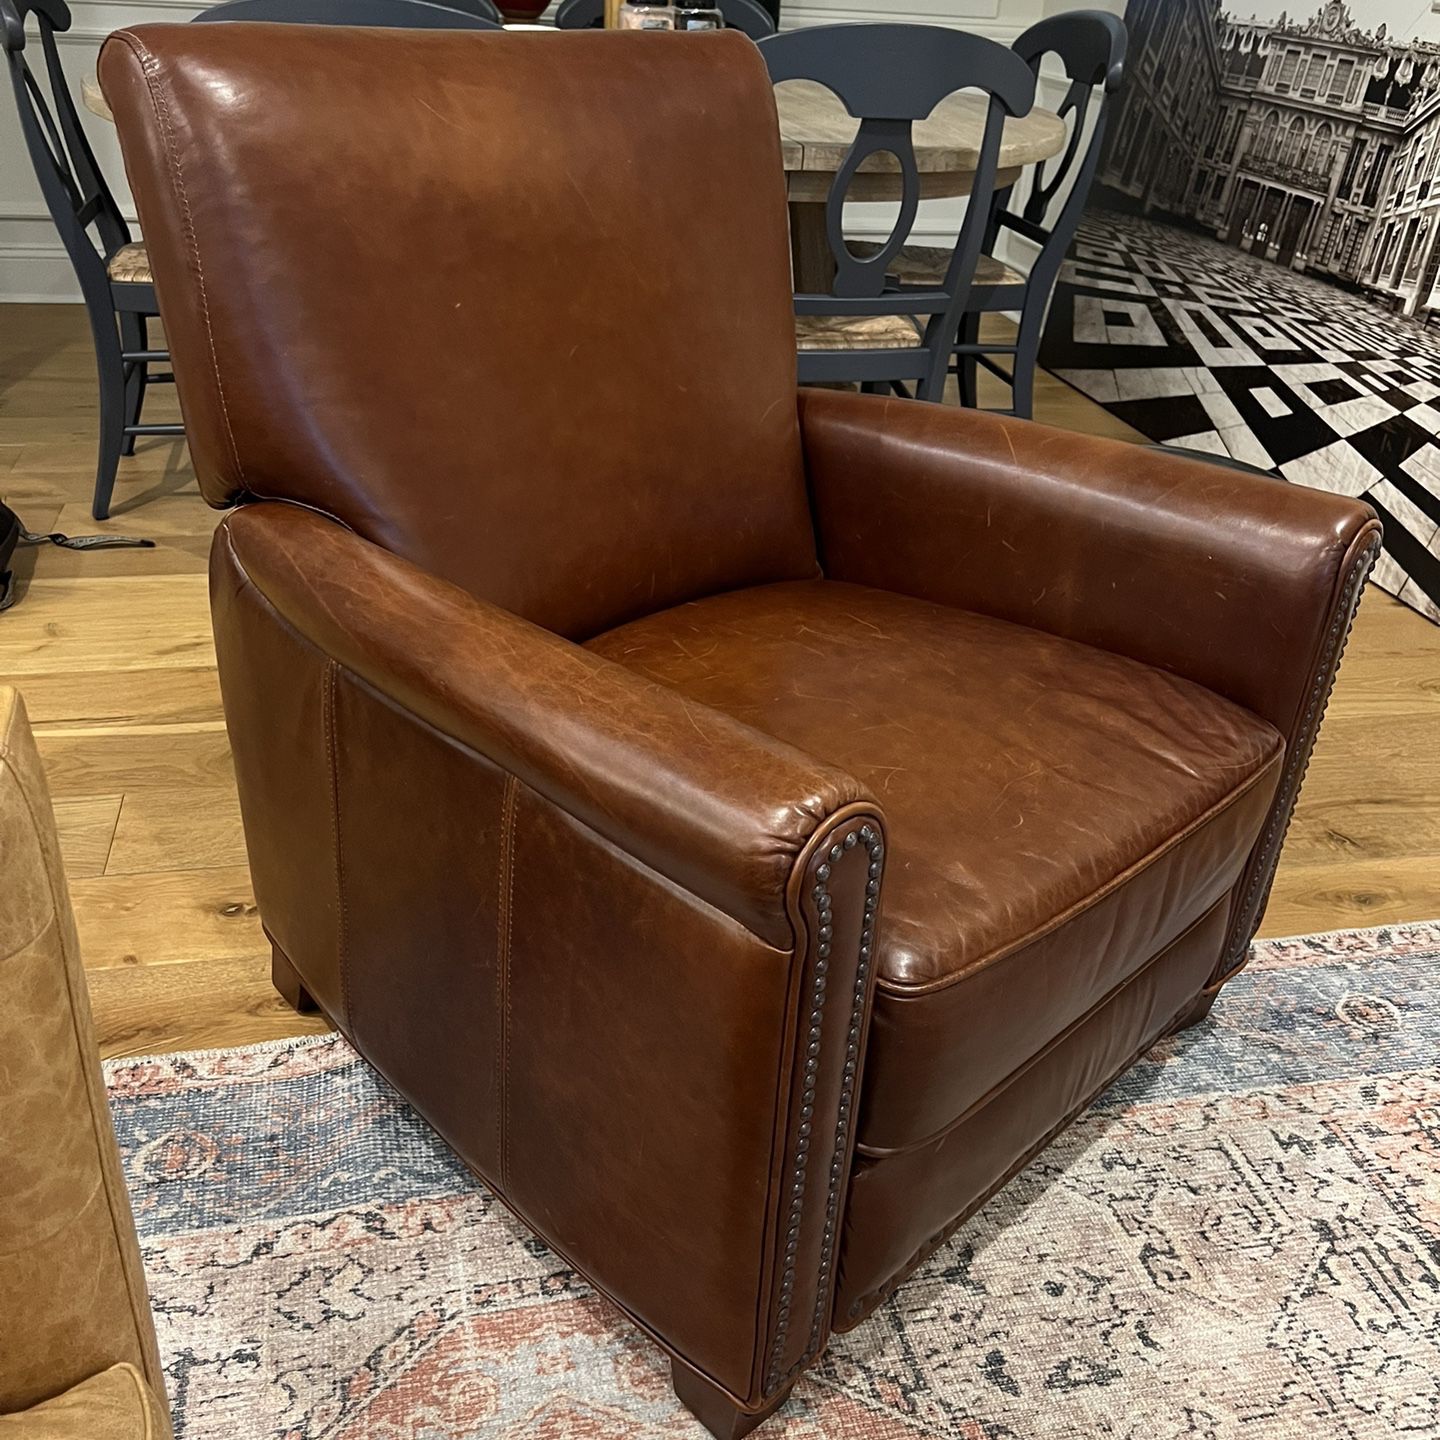 Pottery Barn Leather Recliner